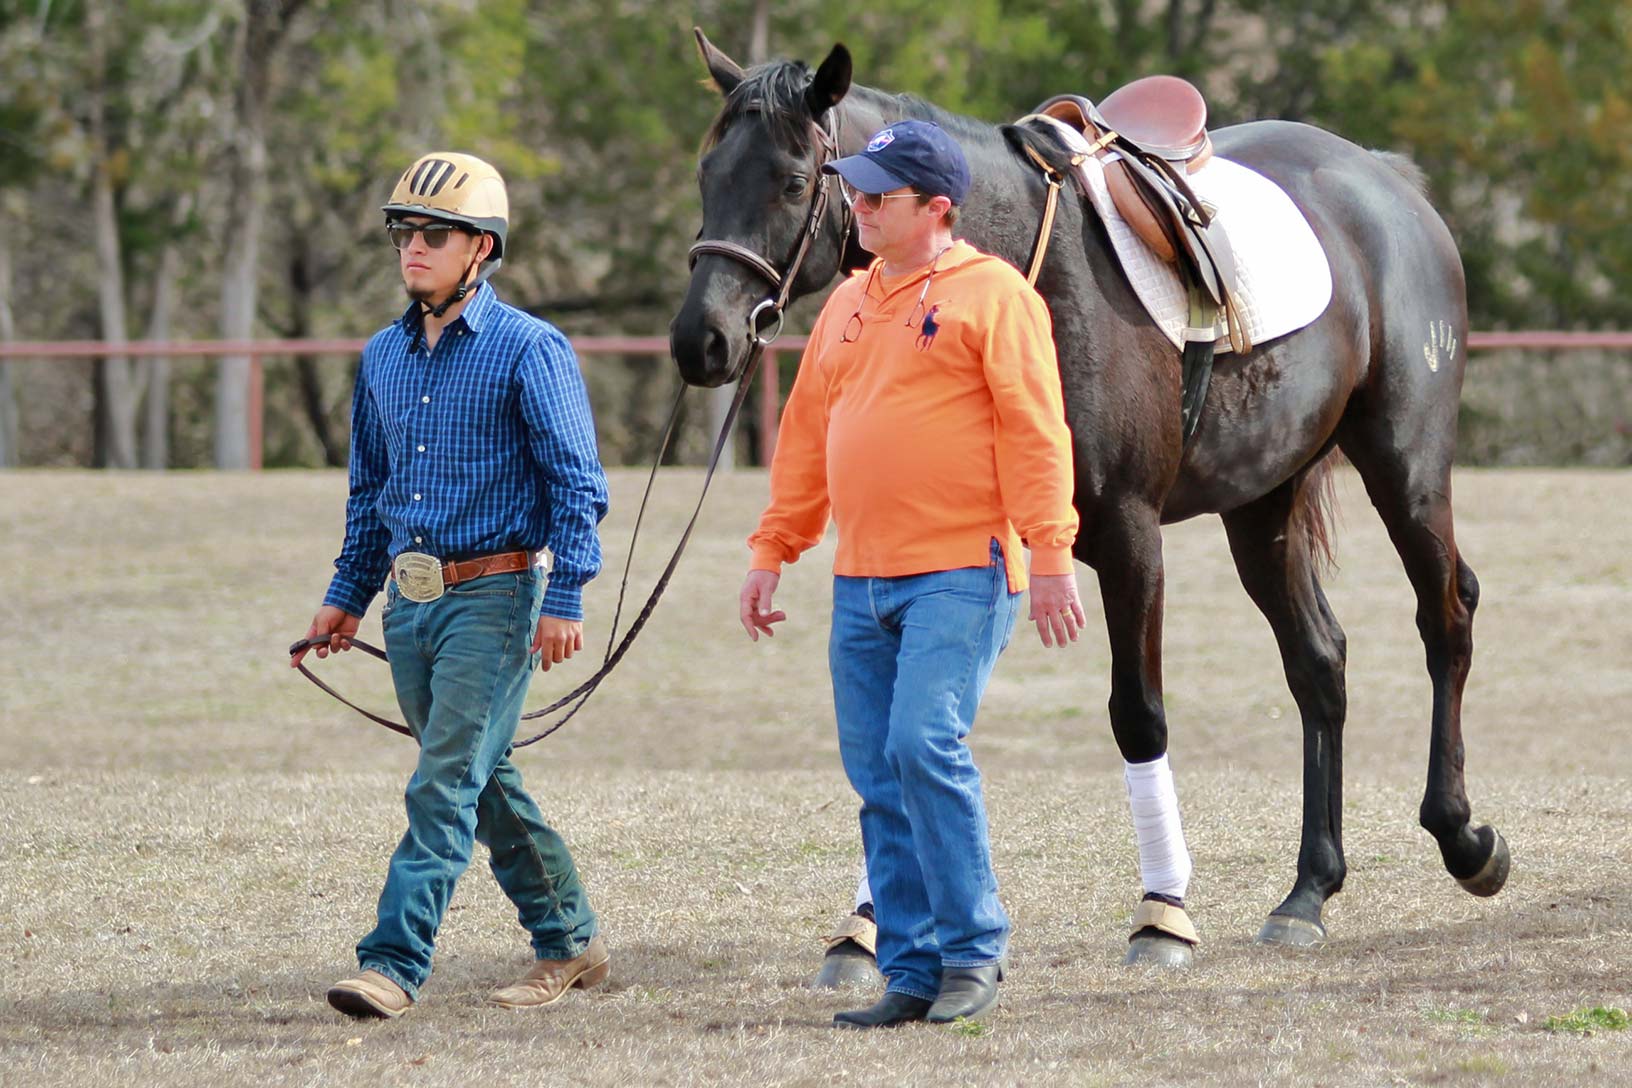 Haven was started at Rusell Equestrian Center and continued his training at Camp Stuart